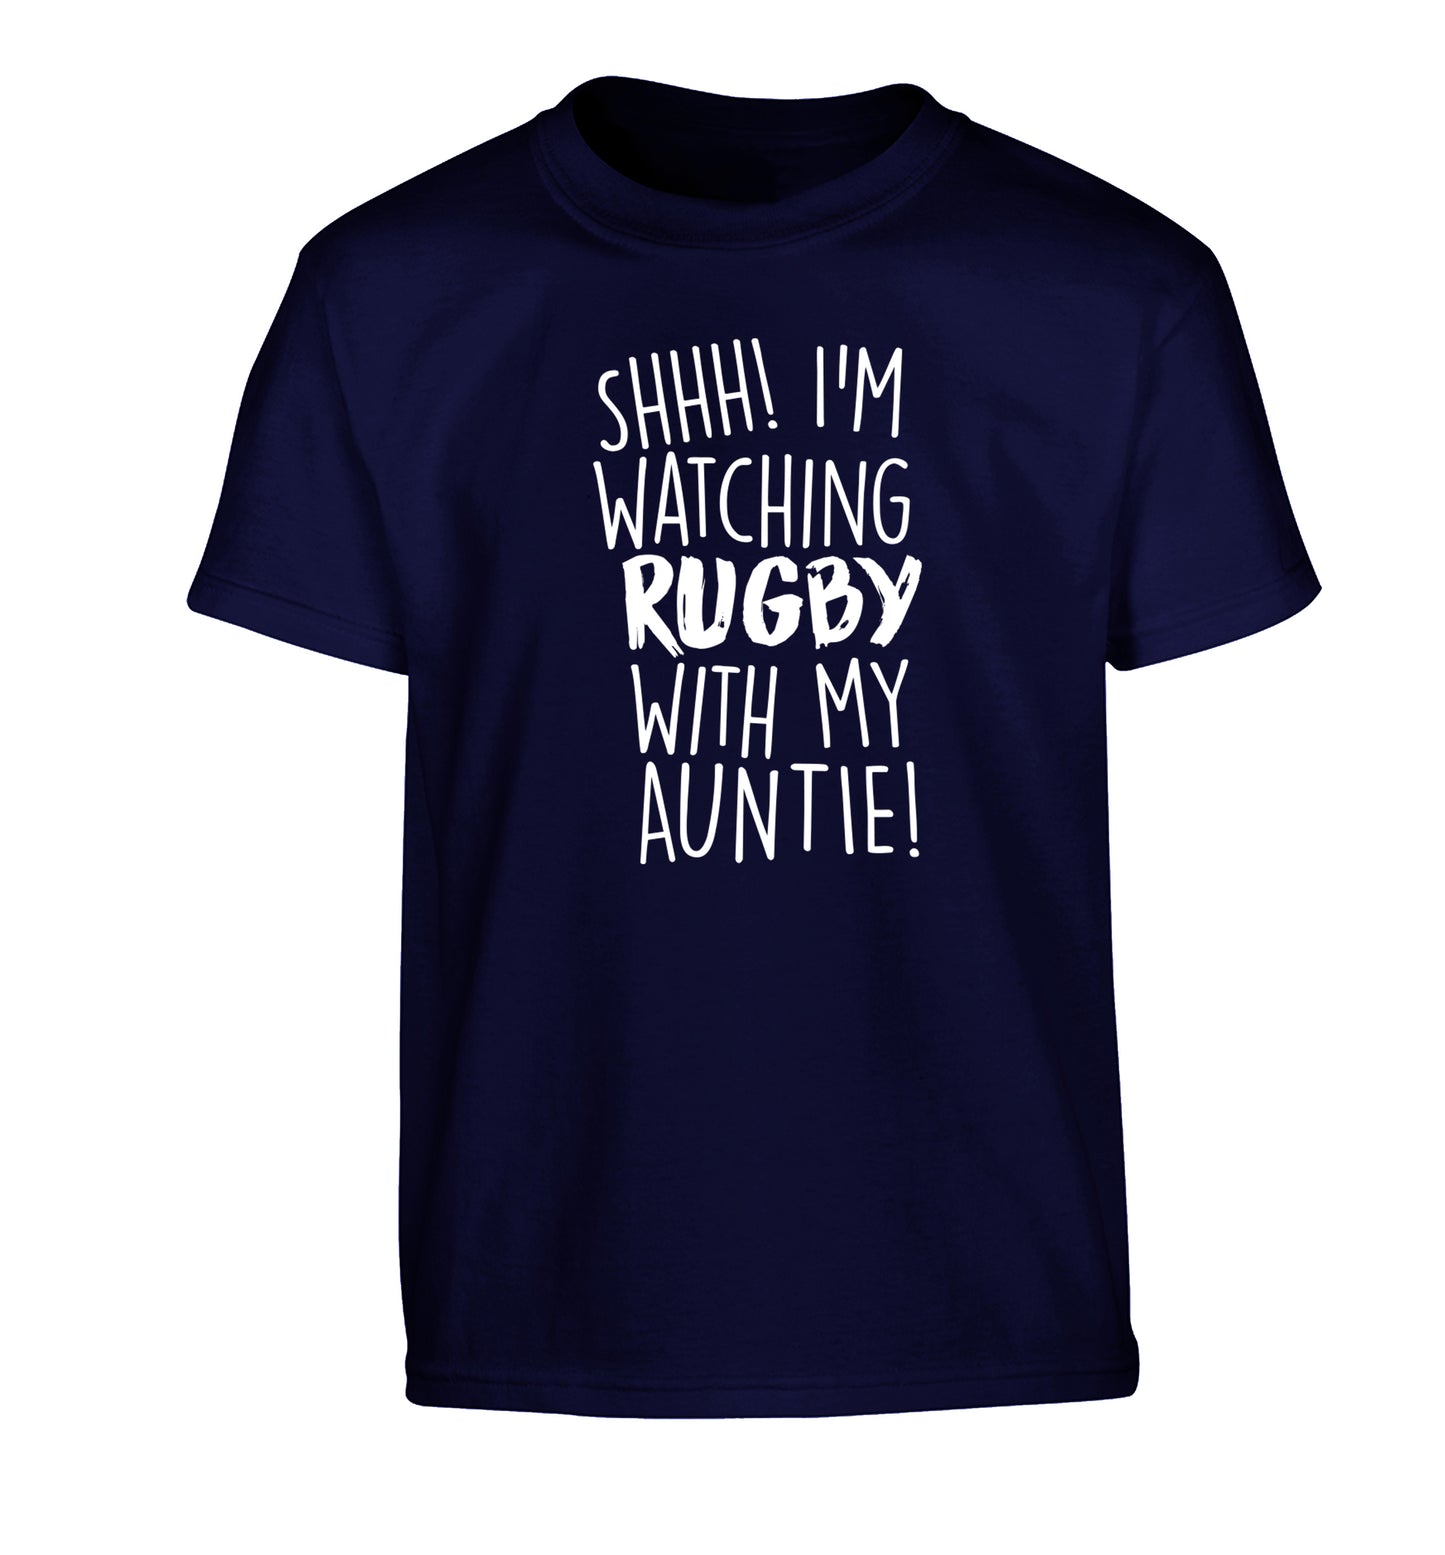 Shhh I'm watchin rugby with my auntie Children's navy Tshirt 12-13 Years